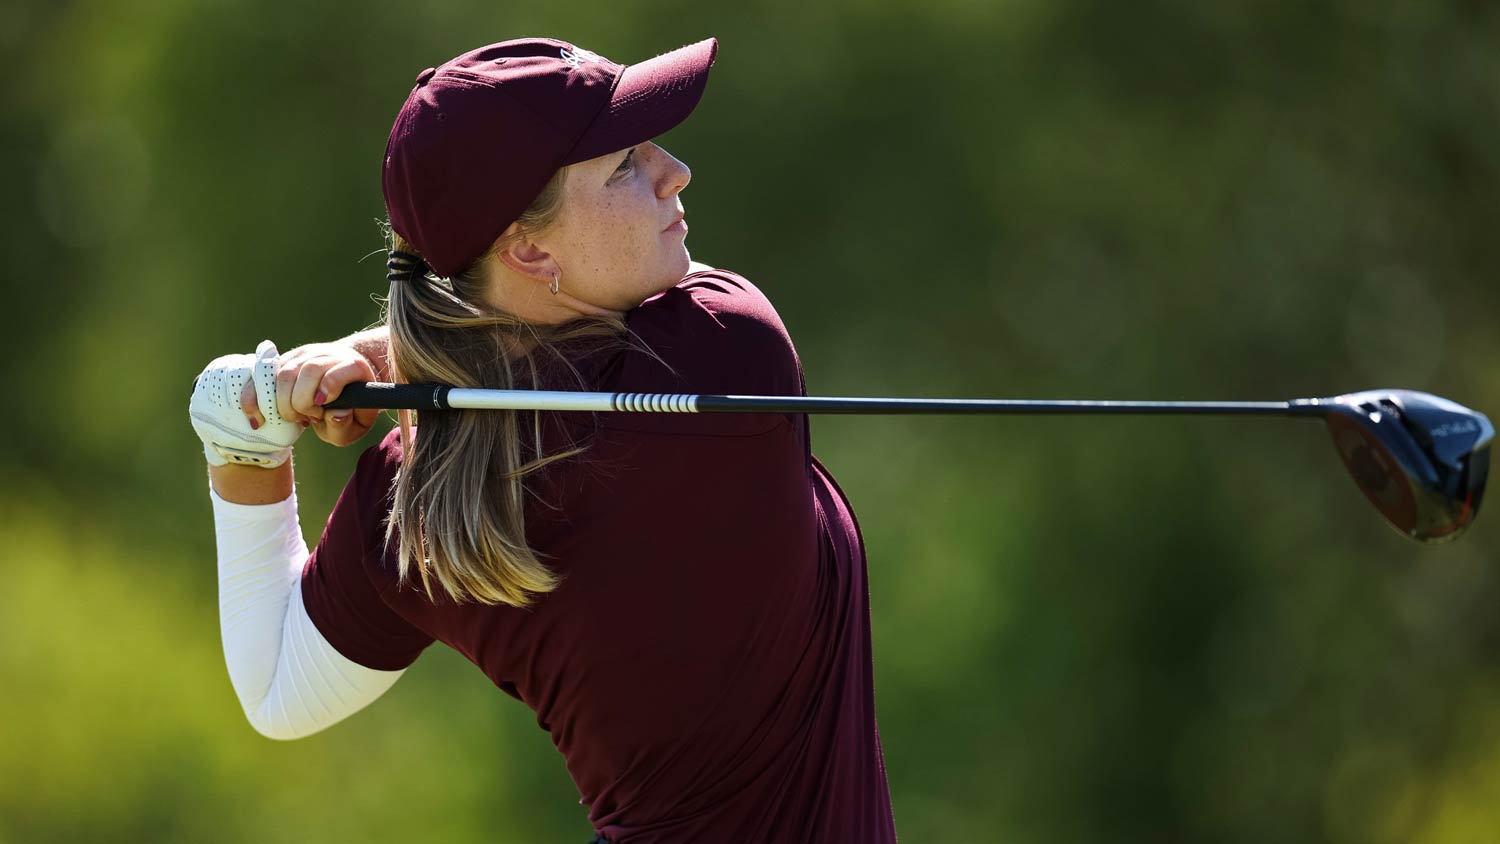 A Texas A&M golfer at the end of her swing